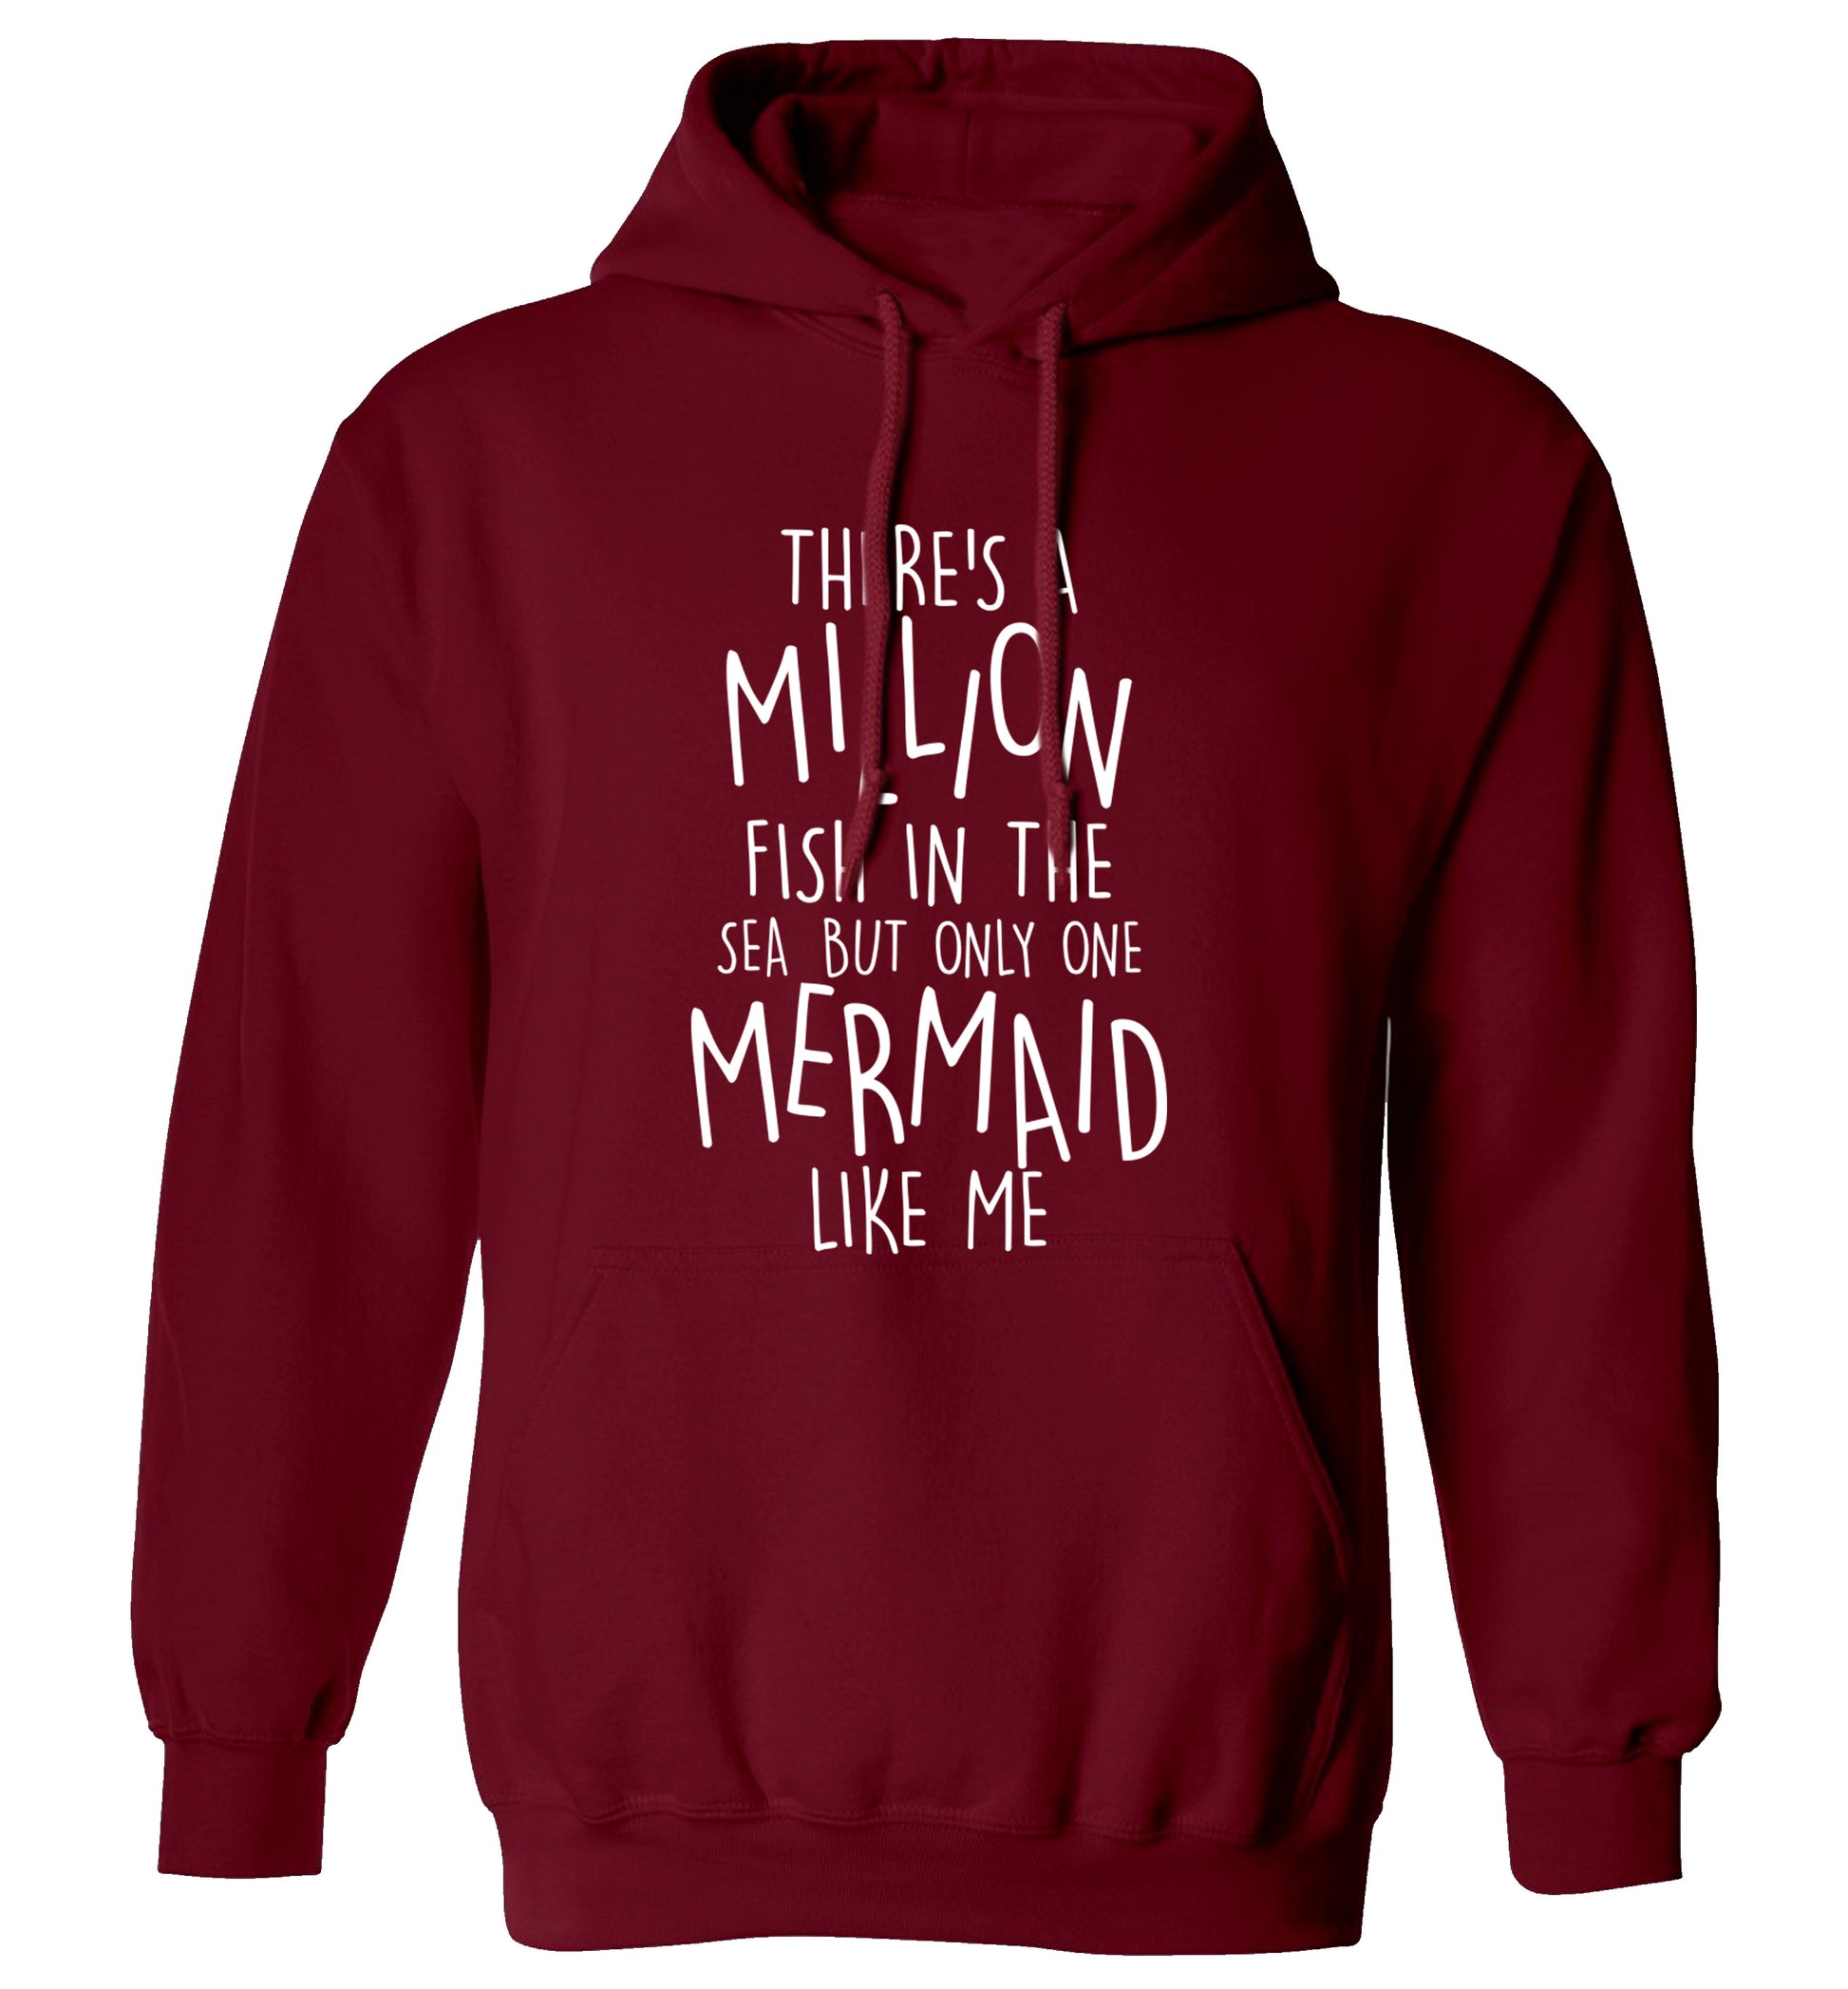 There's a million fish in the sea but only one mermaid like me adults unisex maroon hoodie 2XL